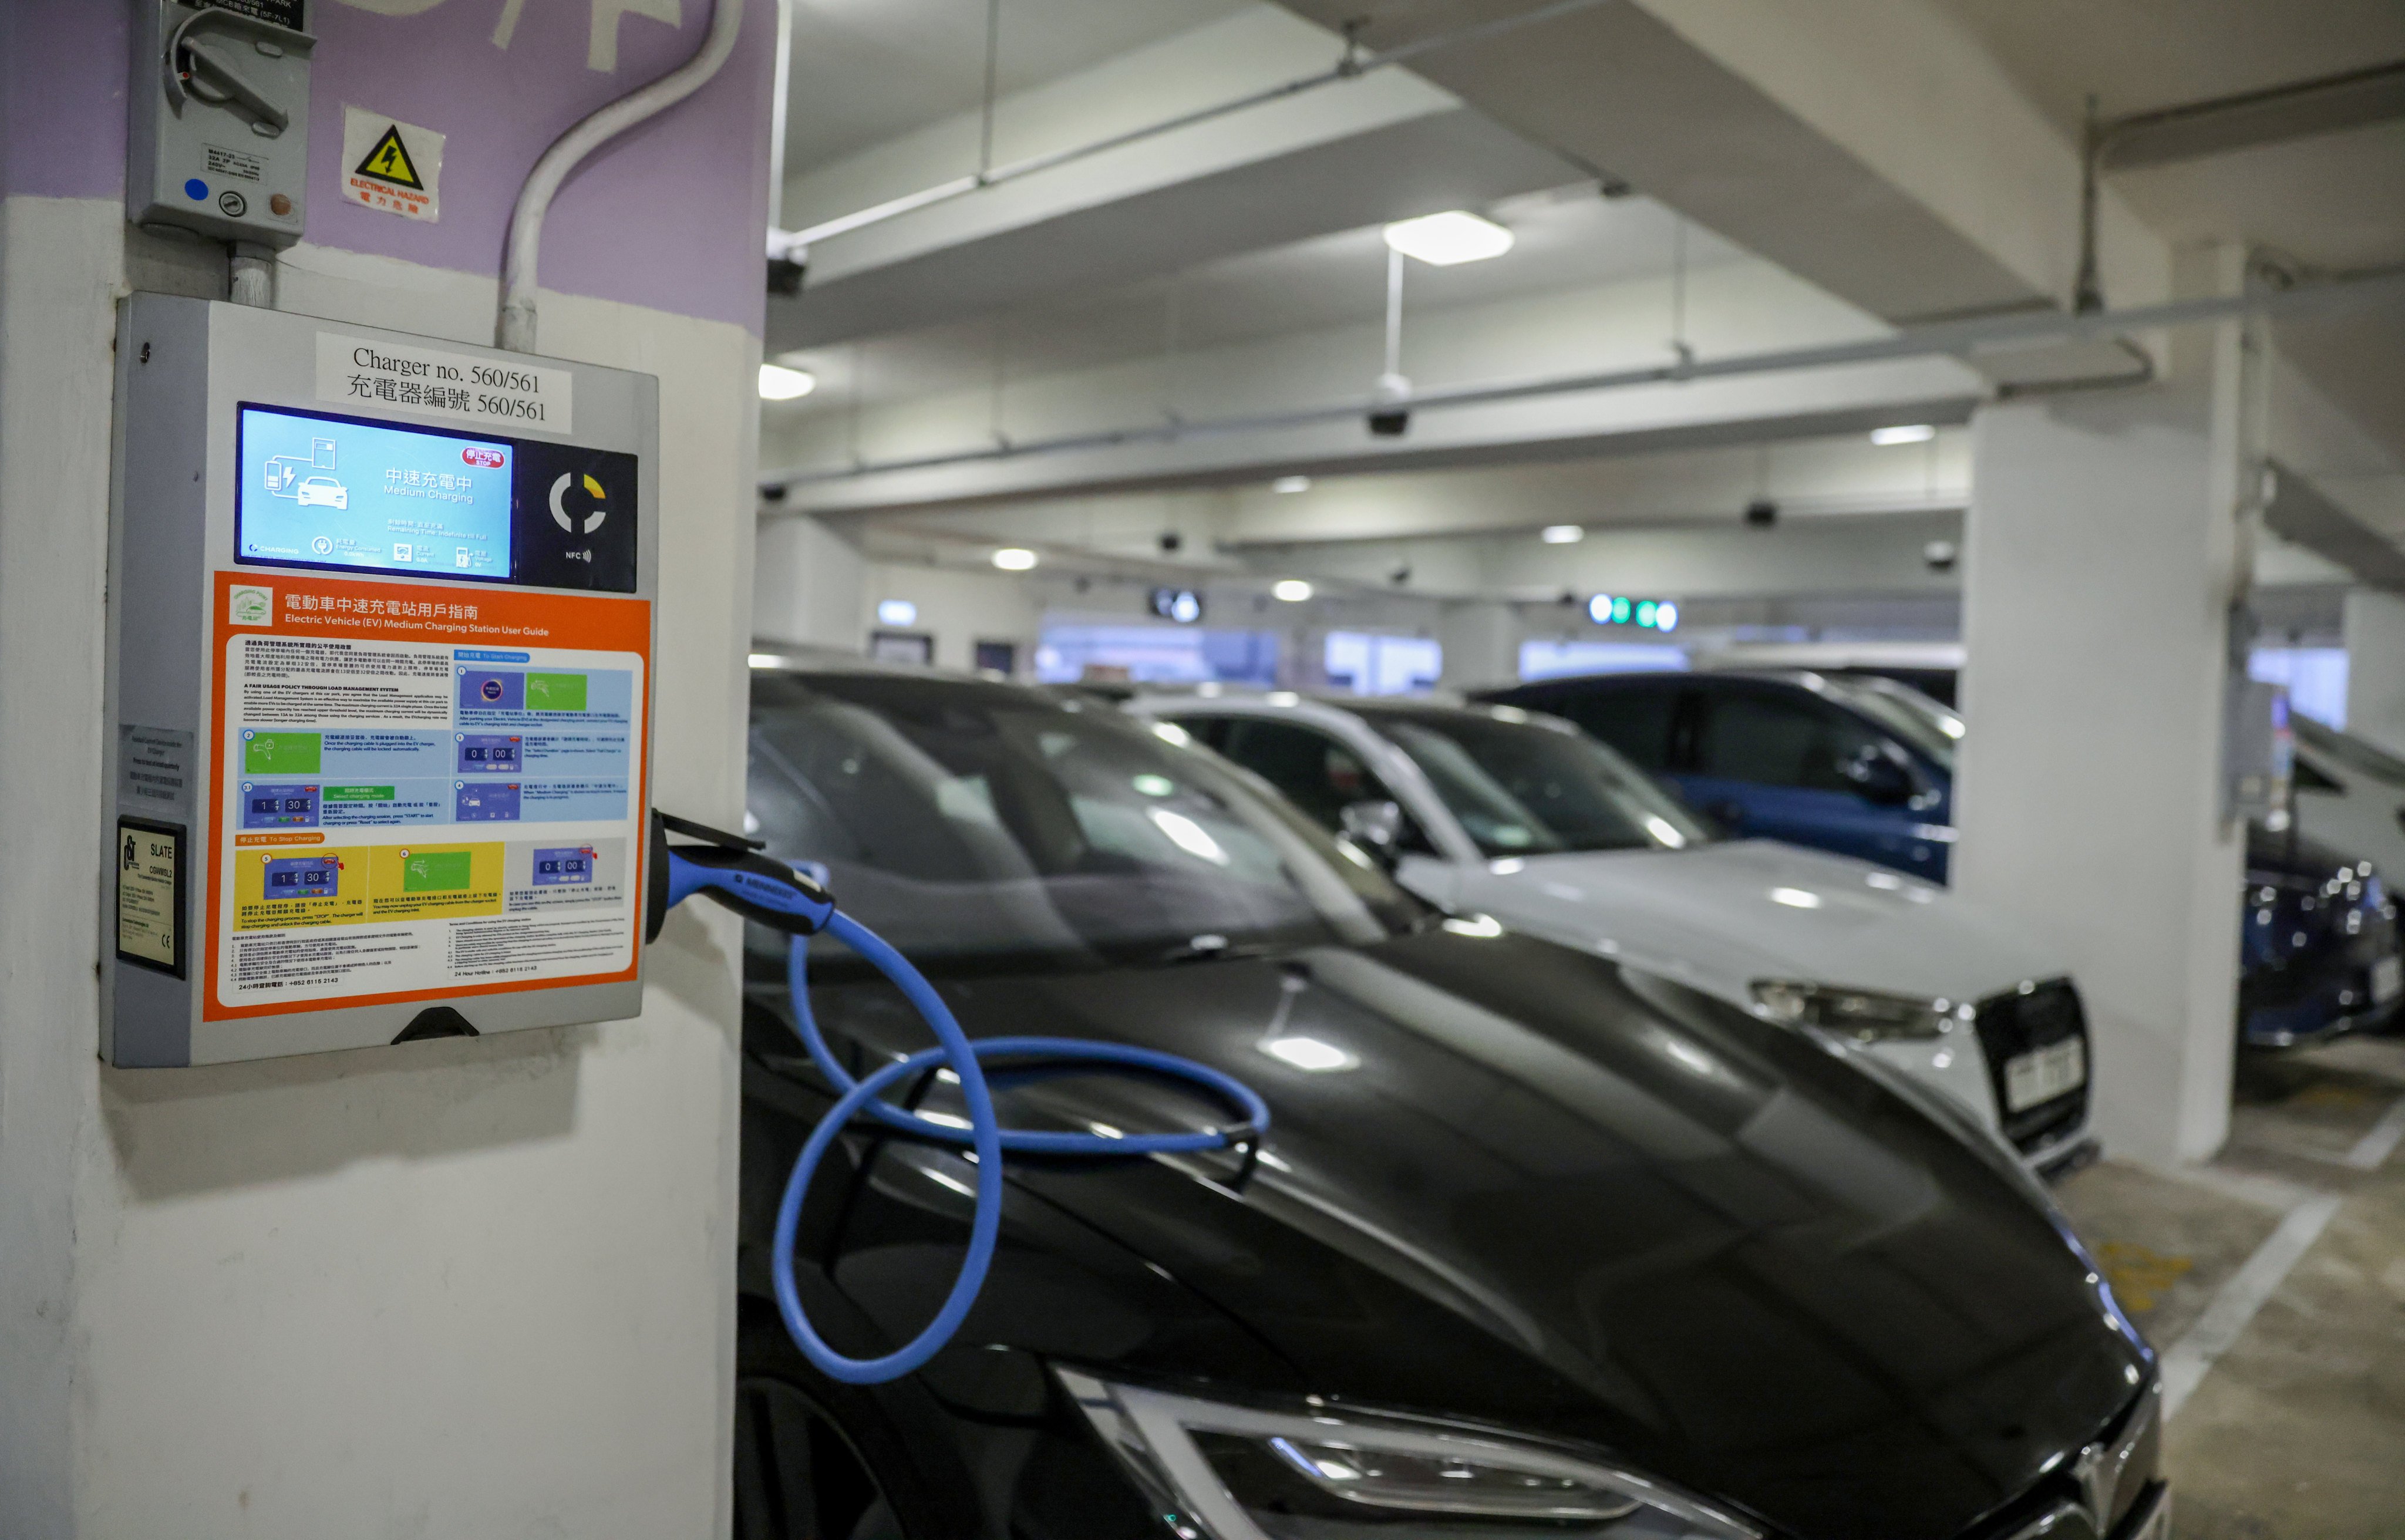 More quick charging stations for electric cars are on their way, the government has said. Photo: May Tse